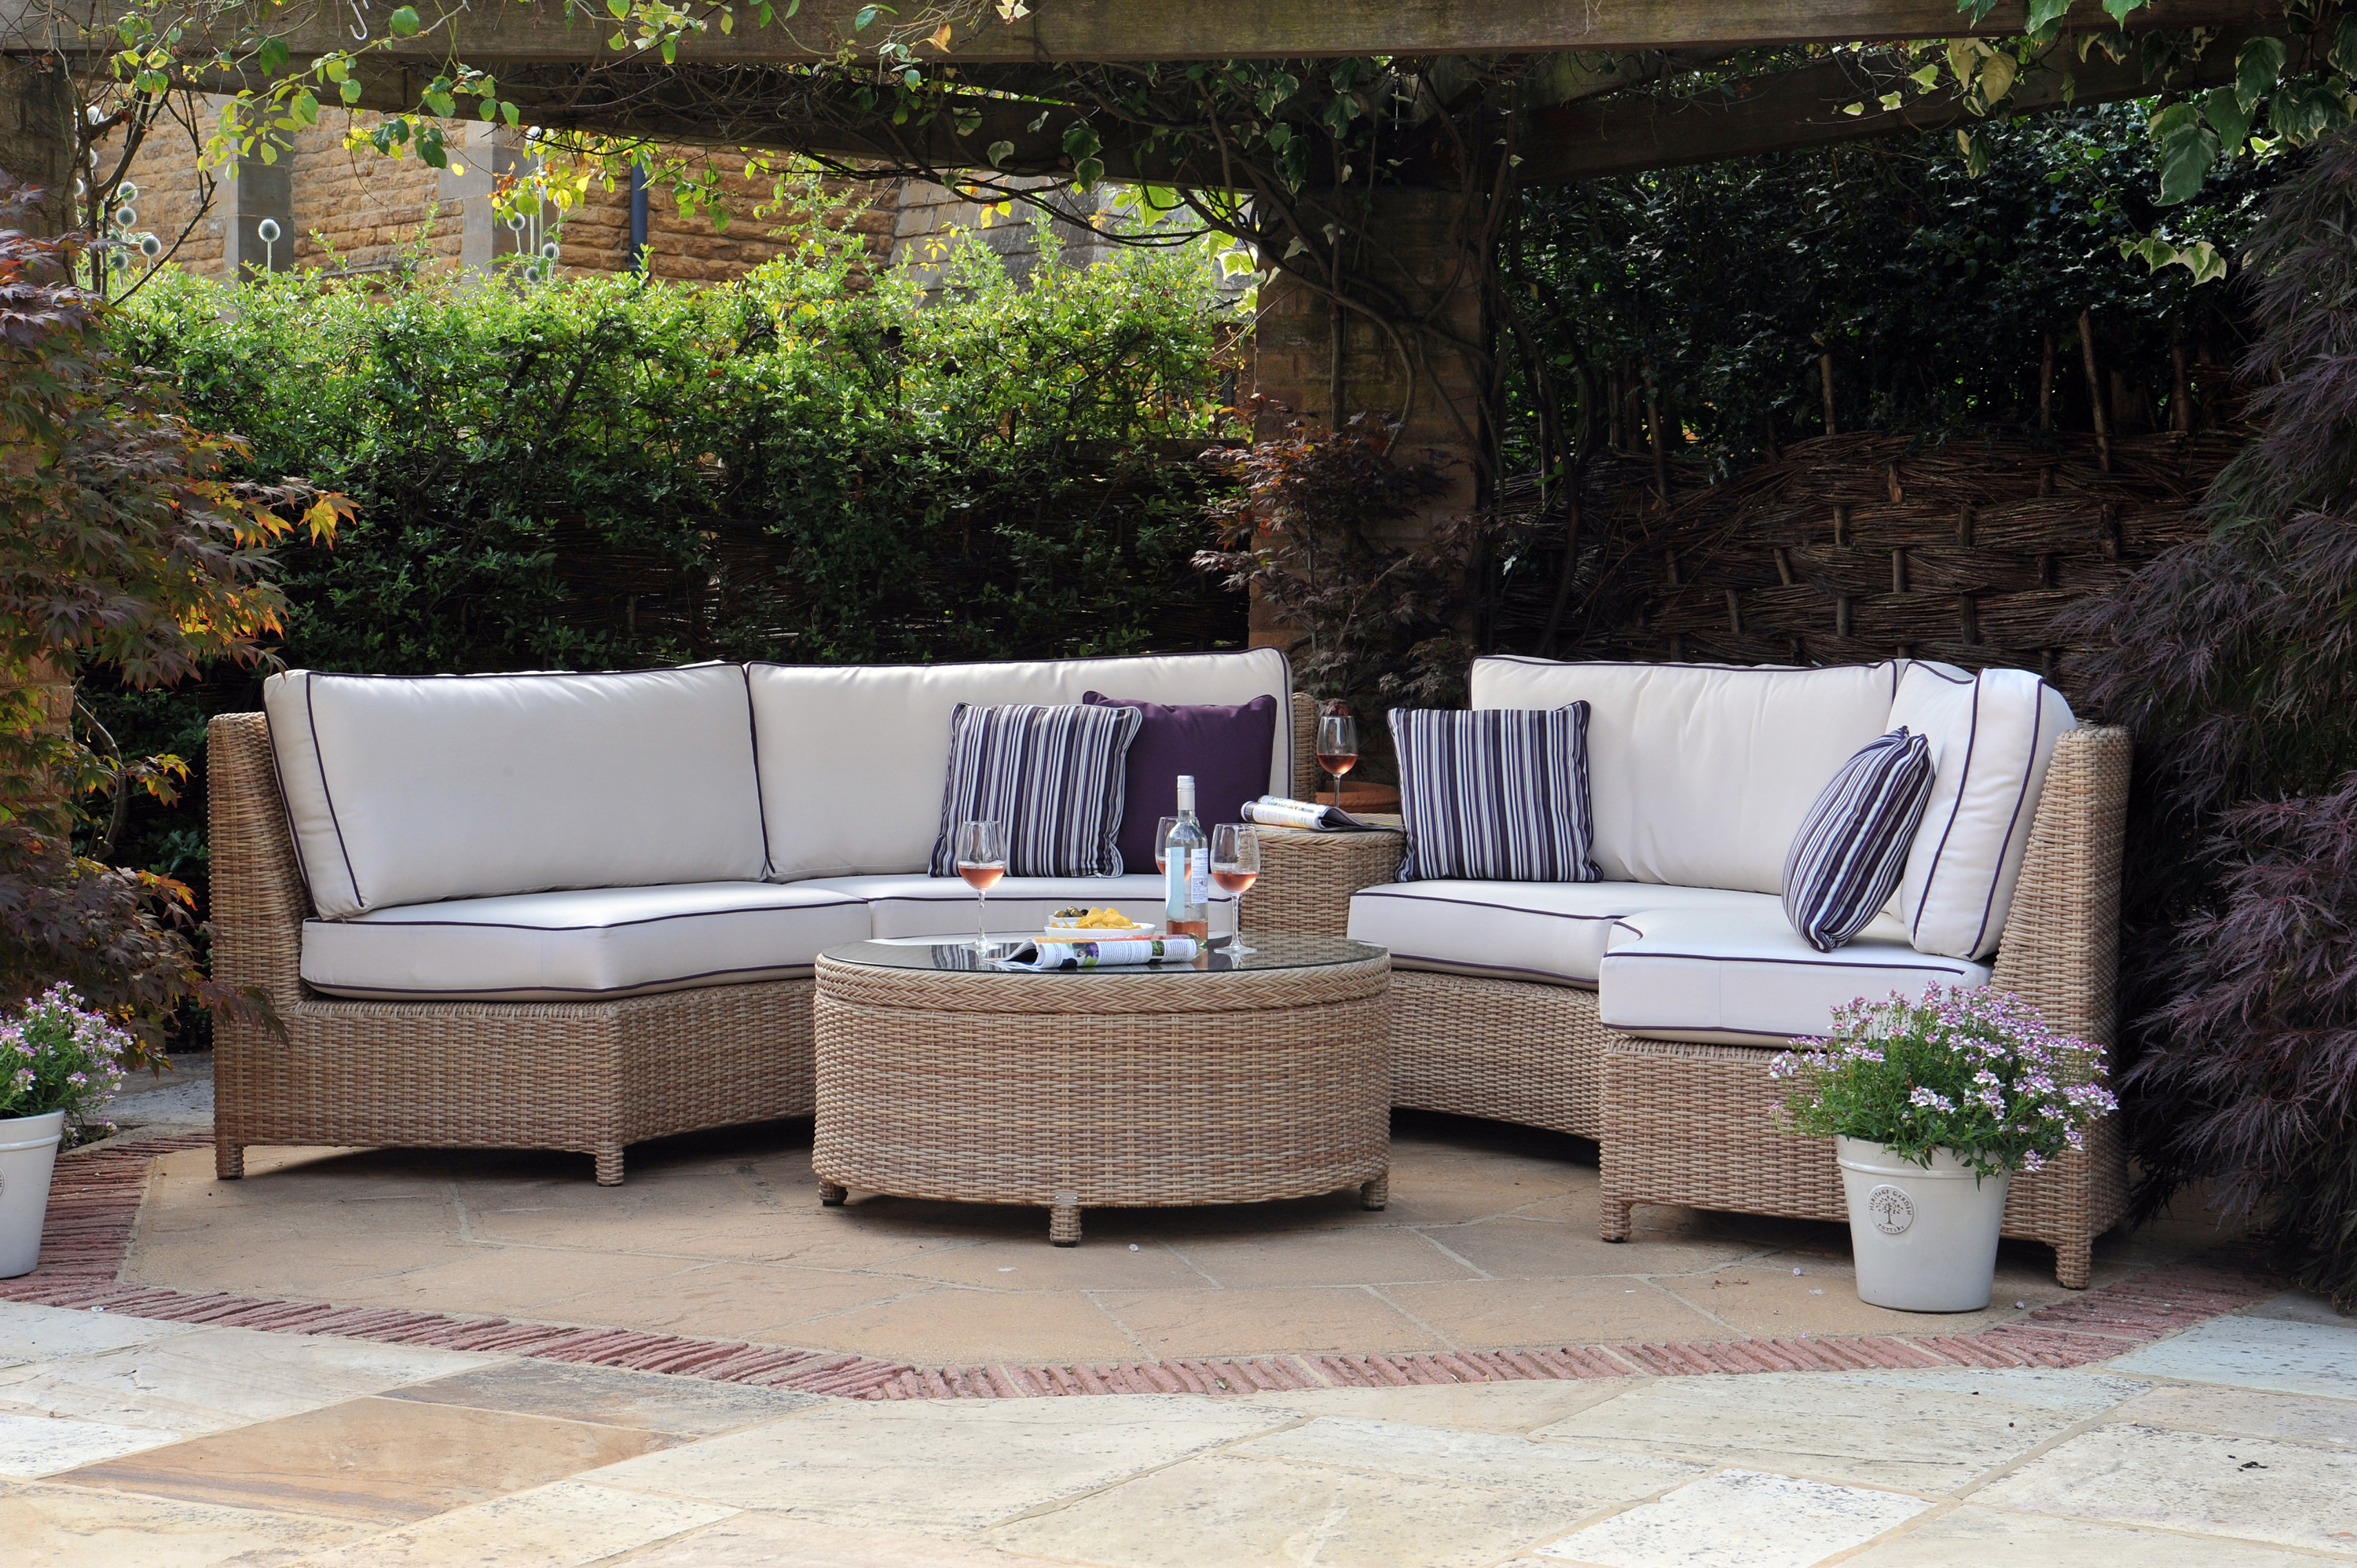 natural rounded cane furniture suite situated on a patio